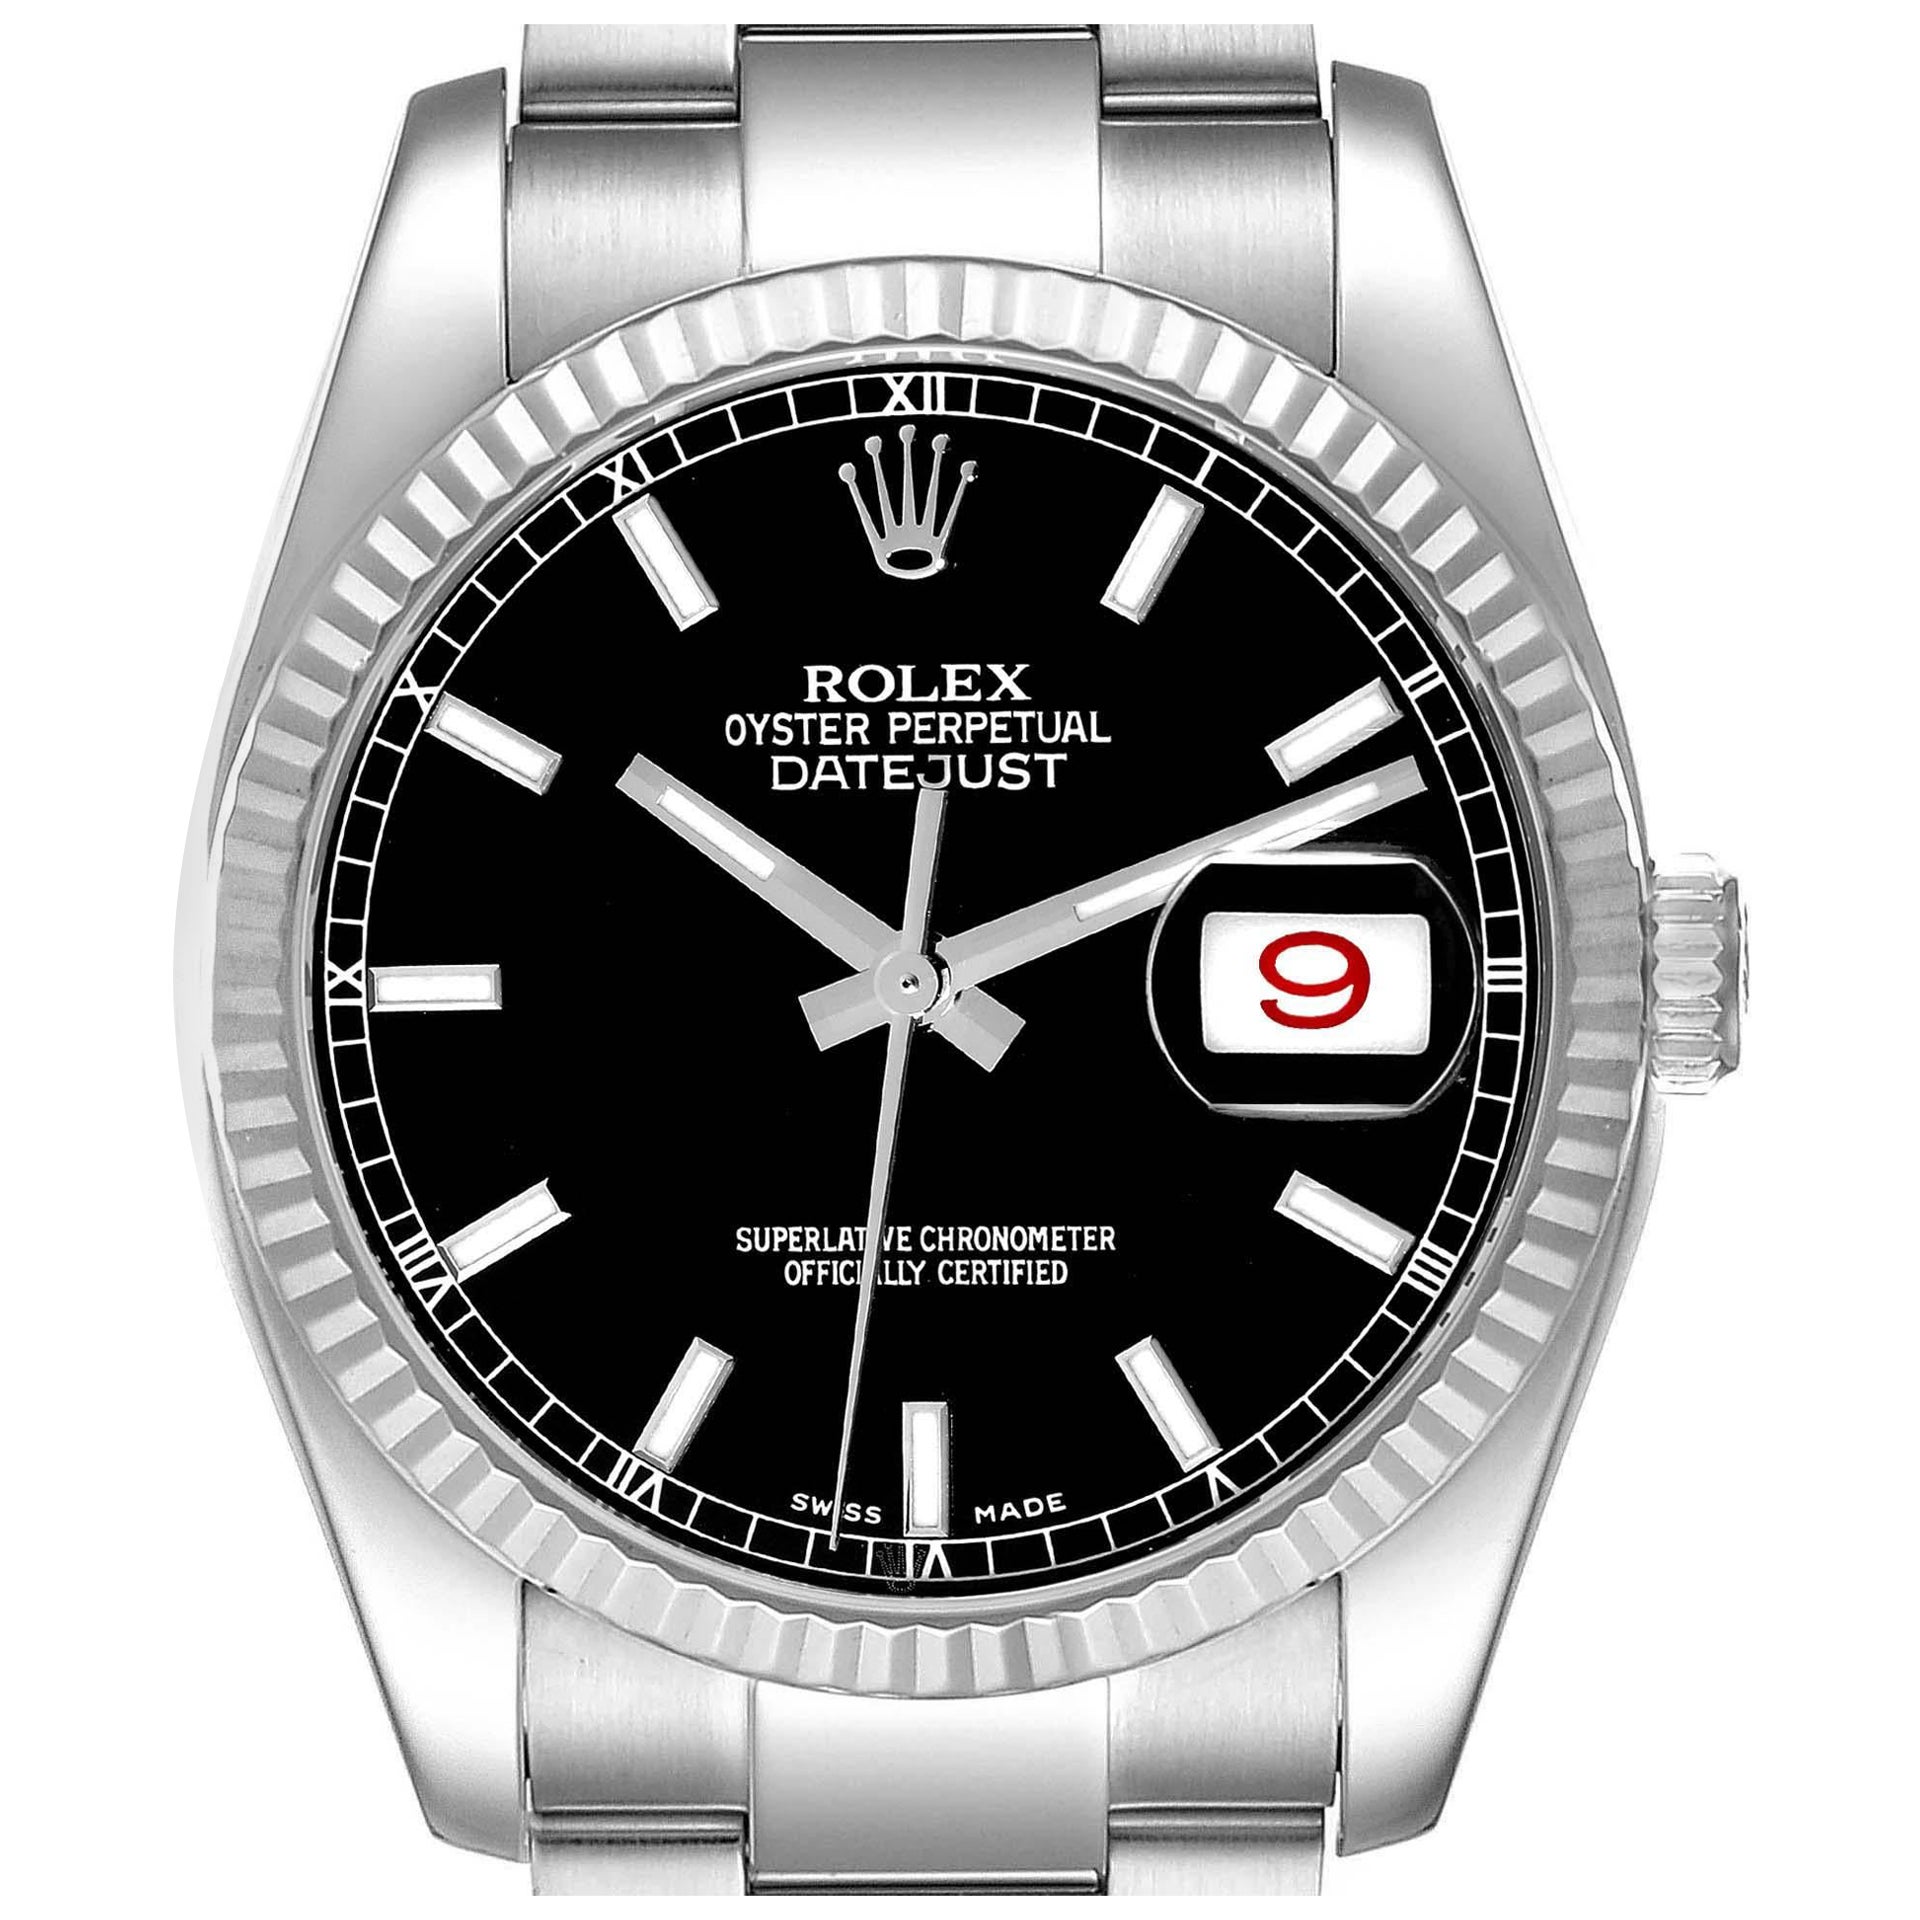 Rolex Datejust Steel White Gold Fluted Bezel Black Dial Mens Watch 116234 For Sale